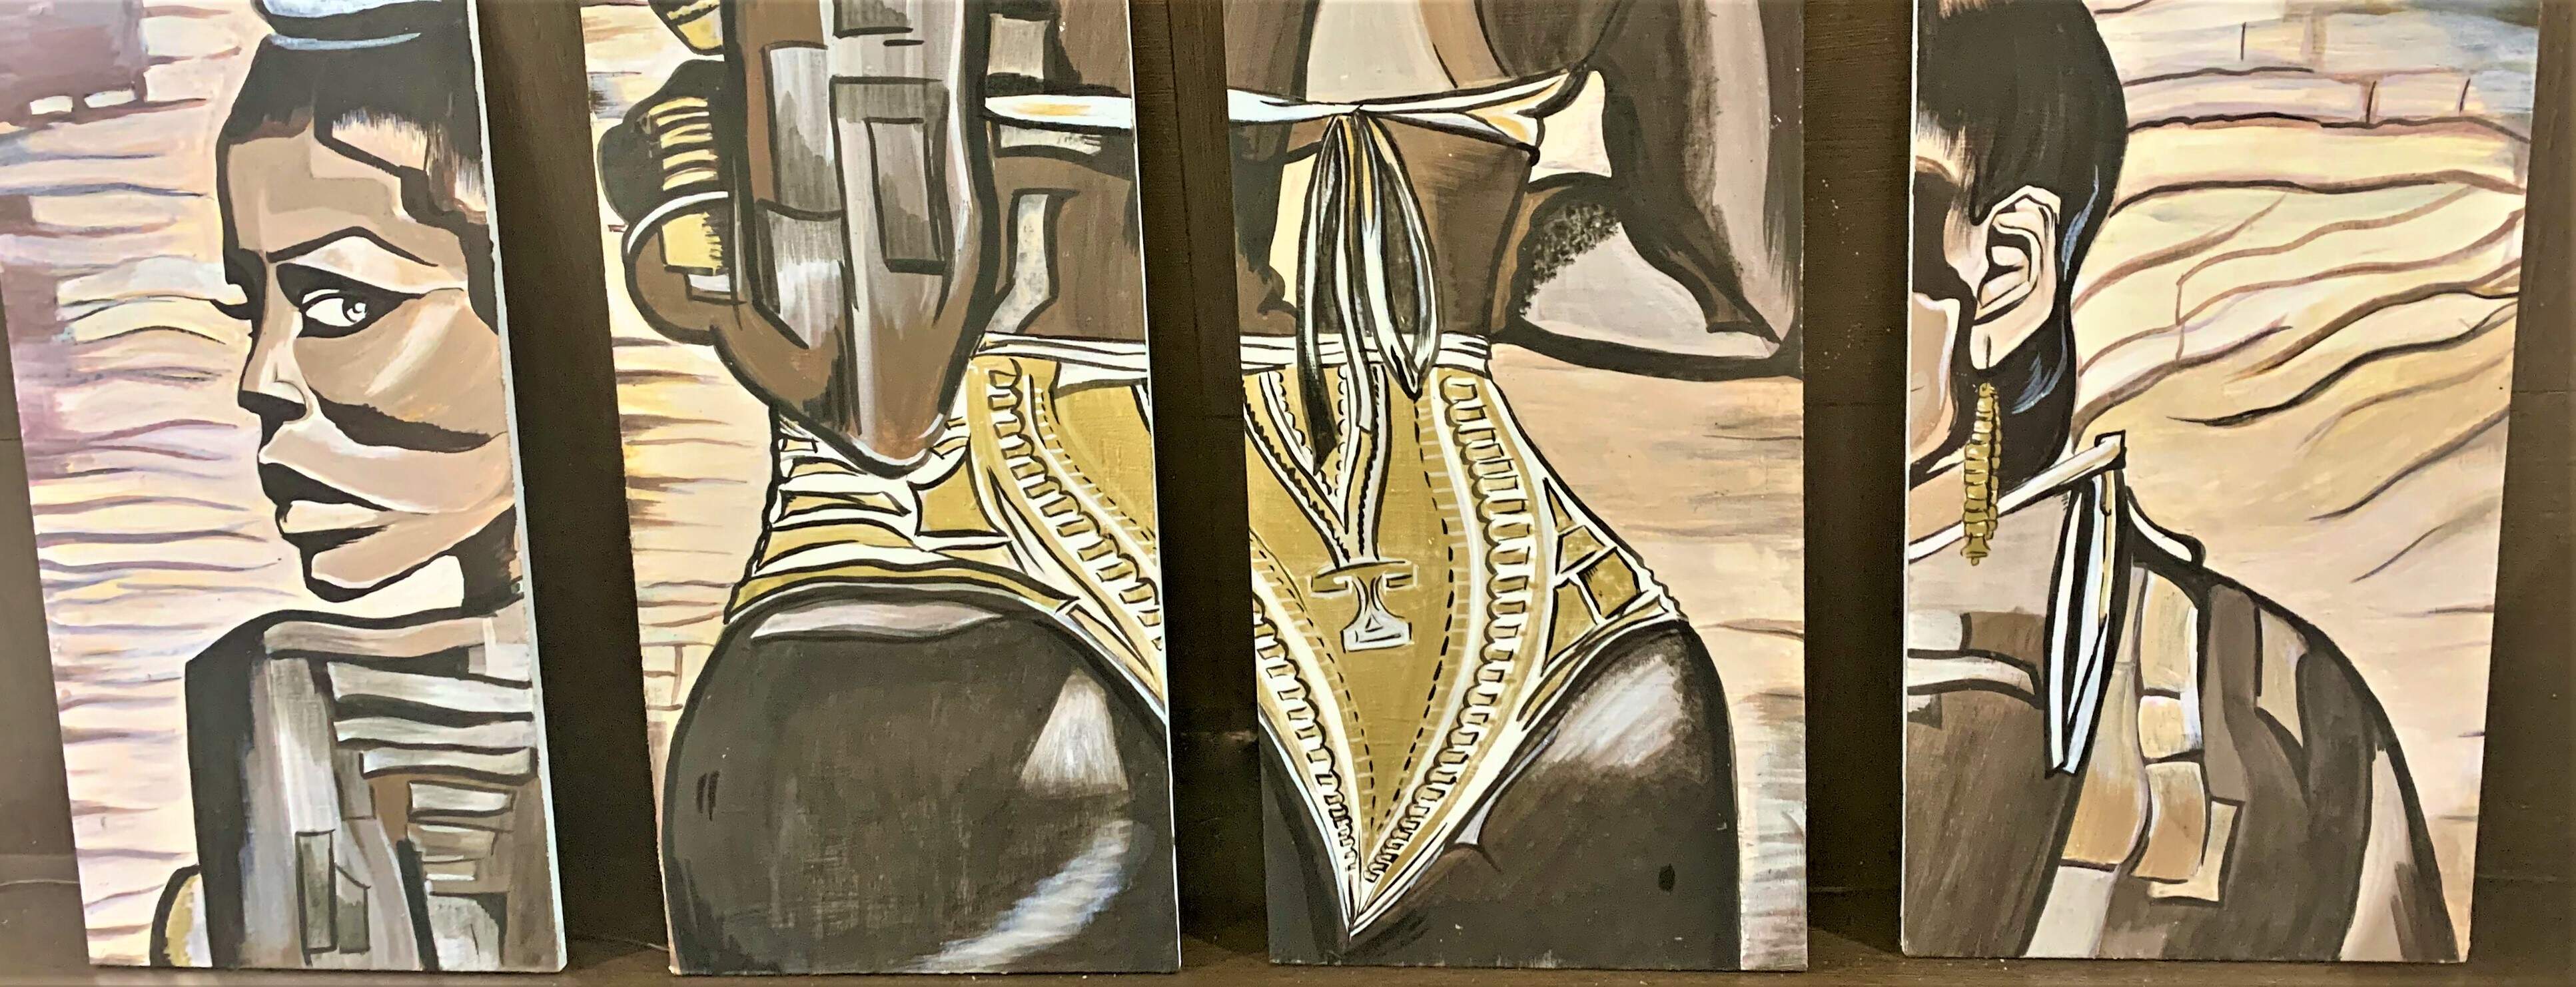 Suffragatte were radical feminist who symbolized positivity and strength.Grey, Gold, Brown and Black   Monochromatic  Color schemePanel Painting using Acrylic paints on wooden plank. Technique used is Cubism Any Size Painter, Designer, Art, Craft, Sculptures, Epoxy Art, Paintings, Art Classes, Home Decor, Drawing, Paintings, Images, Acrylic, Decoration, Canvas, Size, Wooden sculptures, Resin Art, Abstract, Pop Art, Gallery, Devian Art, Wall art, Water Colors, Art Gallery, Oil Paintings, Art Supplies, Water color paintings, art work, fine art, online art, buy art, buy paintings, buy sculptures, buy epoxy art, buy resin art, wall art, famous painter, famous artist, wall decor epoxy, wall decor 3d, 3d art, 3d mdf, painter in Pune, Artist in Pune, Artist in Amanora, Artist in Hadapsar, Artist Pune, Maharastra Artist, India Artist, Top Artist, Epoxy, Resin Art, 3d Wood, Wall Decorations, Art classes, art supplier, art supply, organic colors, non toxic colors, organic pastels, non toxic pastels, crayon, pencils, charcoal, chalks, Artist, Painter, Designer, Art, Craft, Sculptures, Epoxy Art, Paintings, Art Classes, Home Decor, Drawing, Paintings, Images, Acrylic, Decoration, Canvas, Size, Wooden sculptures, Resin Art, Abstract, Pop Art, Gallery, Devian Art, Wall art, Water Colors, Art Gallery, Oil Paintings, Art Supplies, Water color paintings, art work, fine art, online art, buy art, buy paintings, buy sculptures, buy epoxy art, buy resin art, wall art, famous painter, famous artist, wall decor epoxy, wall decor 3d, 3d art, 3d mdf, painter in Pune, Artist in Pune, Artist in Amanora, Artist in Hadapsar, Artist Pune, Maharastra Artist, India Artist, Top Artist, Epoxy, Resin Art, 3d Wood, Wall Decorations, Art classes, art supplier, art supply, organic colors, non toxic colors, organic pastels, non toxic pastels, crayon, pencils, charcoal, chalks, Ganesh Chaturthi, Bright, Brilliant, Deep, Earthy, Harmonious, Intense, Muted, Rich, Saturated, Strong, Texture, Vibrant, Vivid, Abstract, abstract art, acrylic art, acrylic paint, airbrush, art, animation, blending, calligraphy, canvas, canvas painting, cartoon, casting, colors, decorative, decoupage, design, graphite, ink and pen, oil, paint, realism, watercolor, art, Abstract art, Tone/Value, Line, Colour/Colour, composition, Form & Shape, Mood, Texture, Pop art, Arts, Paint, Fine art, Acrylic art, Popular wall art, Modern art, canvas, composition, depiction, Landscape, mural, picture, portrait, sketch, cityscape, likeness, portrait, representation, seascape, abstract, design, artwork, watercolor, amanora, Amanora park town, amanora gateway towers, Pune, hadapsar, Magarpatta, art, myart, myartwork, coolart, funart, abstractart, makearteveryday, artsy, contemporaryart, artlife, practice, wip, workinprogress, experimentalart, visualart, artoftheday, onlineart, realism, sketchbook, sketchbookart, sketching, sketchbookdrawing, dailysketches, sketchdaily, pendrawing, quicksketch, justdraw, sketchpad, sketchoftheday, pencildrawing, figuredrawing, drawsomething, draweveryday, artofdrawing, drawdaily, inkdrawing, mysketchbook, animaldrawing, fundrawing, practicedrawing, peoplesketching, realistart, paintingoftheday, watercolor_daily, watercolorartist, watercolorpainting, watercolorart, acrylicpainting, acrylicpaintings, acrylicpaintingsoncanvas, acryliconcanvas, acrylicart, watercolorsketch, watercolors, oilpaints, oilpainting, acrylics, gouache, oilart, painting, stilllife, figurepainting, practicepainting, art, myart, my art work, cool art, fun art, abstract art, make art everyday, artsy, contemporary art, artlife, practice, wip, work inprogress, experimental art, visual art, art of the day, online art, realism, sketchbook, sketch book art, sketching, sketch book drawing, daily sketches, sketch daily, pen drawing, quick sketch, just draw, sketch pad, sketch of the day, pencil drawing, figure drawing, draw something, draw every day, art of drawing, draw daily, ink drawing, my sketch book, animal drawing, fun drawing, practice drawing, people sketching, realistart, painting of the day, water color daily, water color artist, water color painting, water color art, acrylic painting, acrylic paintings, acrylic paintings on canvas, acrylic on canvas, acrylic art, water color sketch, water colors, oil paints, oil painting, acrylics, gouache, oil art, painting, still life, figure painting, practice painting, digital painting, character concepts, concept art, character art, art of instagram, art basel, art now,  artists,  follow my art, art page, best art, ig art, art now, insta art, daily art, art exist, art look,  art suffer, art hold, art stay, art continues towin, art rise, art wins always, art for art lovers, art seem, art begin, art limit, go art, art belong, art fact, art, artist hour, see my art, name plaques, name plates, wall decor, 3d decor, art lessons, art classes, online art classes, Pune art classes, Pune online classes, baby keepsakes, baby memories, baby art, painting process, painting on canvas, painting on wood, painting on paper, painting studio, painting a day, MDF work, 3D Mdf, wood work, furniture, home decor, resin art, art gallery, acrylic paint, art deco, wall painting, abstract wall painting, paint online, word art, paint 3d, line art, famous artist, famous painting, cubism, met art, affordable artist in Pune, affordable home decoration in Pune, affordable resin art in Pune, affordable mural in Pune, affordable 3D art in Pune, affordable wall decor in Pune, affordable abstract work in Pune, affordable contemporary art in Pune, affordable art classes in Pune, affordable online art class in Pune, affordable epoxy art in Pune, affordable 3d mdf art in pune, affordable acrylic art in Pune, affordable art supplier in Pune, affordable artist in Hadapsar, affordable home decoration in Hadapsar, affordable resin art in Hadapsar, affordable mural in Hadapsar, affordable 3D art in Hadapsar, affordable wall decor in Hadapsar, affordable abstract work in Hadapsar, affordable contemporary art in Hadapsar, affordable art classes in Hadapsar, affordable online art class in Hadapsar, affordable epoxy art in Hadapsar, affordable 3d mdf art in Hadapsar, affordable acrylic art in Hadapsar, affordable art supplier in Hadapsar, affordable artist in Amanora, affordable home decoration in Amanora, affordable resin art in Amanora, affordable mural in Amanora, affordable 3D art in Amanora, affordable wall decor in Amanora, affordable abstract work in Amanora, affordable contemporary art in Amanora, affordable art classes in Amanora, affordable online art class in Amanora, affordable epoxy art in Amanora, affordable 3d mdf art in Amanora, affordable acrylic art in Amanora, affordable art supplier in Amanora, affordable artist in Magarpatta, affordable home decoration in Magarpatta, affordable resin art in Magarpatta, affordable mural in Magarpatta, affordable 3D art in Magarpatta, affordable wall decor in Magarpatta, affordable abstract work in Magarpatta, affordable contemporary art in Magarpatta, affordable art classes in Magarpatta, affordable online art class in Magarpatta, affordable epoxy art in Magarpatta, affordable 3d mdf art in Magarpatta, affordable acrylic art in Magarpatta, affordable art supplier in Magarpatta, affordable artist in Kalyani Nagar, affordable home decoration in Kalyani Nagar, affordable resin art in Kalyani Nagar, affordable mural in Kalyani Nagar, affordable 3D art in Kalyani Nagar, affordable wall decor in Kalyani Nagar, affordable abstract work in Kalyani Nagar, affordable contemporary art in Kalyani Nagar, affordable art classes in Kalyani Nagar, affordable online art class in Kalyani Nagar, affordable epoxy art in Kalyani Nagar, affordable 3d mdf art in Kalyani Nagar, affordable acrylic art in Kalyani Nagar, affordable art supplier in Kalyani Nagar, affordable artist in Koregaon Park, affordable home decoration in Koregaon Park, affordable resin art in Koregaon Park, affordable mural in Koregaon Park, affordable 3D art in Koregaon Park, affordable wall decor in Koregaon Park, affordable abstract work in Koregaon Park, affordable contemporary art in Koregaon Park, affordable art classes in Koregaon Park, affordable online art class in Koregaon Park, affordable epoxy art in Koregaon Park, affordable 3d mdf art in Koregaon Park, affordable acrylic art in Koregaon Park, affordable art supplier in Koregaon Park, Painter, Designer, Art, Craft, Sculptures, Epoxy Art, Paintings, Art Classes, Home Decor, Drawing, Paintings, Images, Acrylic, Decoration, Canvas, Size, Wooden sculptures, Resin Art, Abstract, Pop Art, Gallery, Devian Art, Wall art, Water Colors, Art Gallery, Oil Paintings, Art Supplies, Water color paintings, art work, fine art, online art, buy art, buy paintings, buy sculptures, buy epoxy art, buy resin art, wall art, famous painter, famous artist, wall decor epoxy, wall decor 3d, 3d art, 3d mdf, painter in Pune, Artist in Pune, Artist in Amanora, Artist in Hadapsar, Artist Pune, Maharastra Artist, India Artist, Top Artist, Epoxy, Resin Art, 3d Wood, Wall Decorations, Art classes, art supplier, art supply, organic colors, non toxic colors, organic pastels, non toxic pastels, crayon, pencils, charcoal, chalks,affordable PULA Certified artist in Koregaon Park, affordable PULA Certified home decoration in Koregaon Park, affordable PULA Certified resin art in Koregaon Park, affordable PULA Certified mural in Koregaon Park, affordable PULA Certified 3D art in Koregaon Park, affordable PULA Certified wall decor in Koregaon Park, affordable PULA Certified abstract work in Koregaon Park, affordable PULA Certified contemporary art in Koregaon Park, affordable PULA Certified art classes in Koregaon Park, affordable PULA Certified online art class in Koregaon Park, affordable PULA Certified epoxy art in Koregaon Park, affordable PULA Certified 3d mdf art in Koregaon Park, affordable PULA Certified acrylic art in Koregaon Park, affordable PULA Certified art supplier in Koregaon Park, affordable PULA Certified artist in Pune, affordable PULA Certified home decoration in Pune, affordable PULA Certified resin art in Pune, affordable PULA Certified mural in Pune, affordable PULA Certified 3D art in Pune, affordable PULA Certified wall decor in Pune, affordable PULA Certified abstract work in Pune, affordable PULA Certified contemporary art in Pune, affordable PULA Certified art classes in Pune, affordable PULA Certified online art class in Pune, affordable PULA Certified epoxy art in Pune, affordable PULA Certified 3d mdf art in Pune, affordable PULA Certified acrylic art in Pune, affordable PULA Certified art supplier in Pune, affordable PULA Certified artist in Viman Nagar, affordable PULA Certified home decoration in Viman Nagar, affordable PULA Certified resin art in Viman Nagar, affordable PULA Certified mural in Viman Nagar, affordable PULA Certified 3D art in Viman Nagar, affordable PULA Certified wall decor in Viman Nagar, affordable PULA Certified abstract work in Viman Nagar, affordable PULA Certified contemporary art in Viman Nagar, affordable PULA Certified art classes in Viman Nagar, affordable PULA Certified online art class in Viman Nagar, affordable PULA Certified epoxy art in Viman Nagar, affordable PULA Certified 3d mdf art in Viman Nagar, affordable PULA Certified acrylic art in Viman Nagar, affordable PULA Certified art supplier in Viman Nagar, #5elements, water art, earth art, earth painting, space painting, space art, water painting, fire art, fire painting, 5 elements of earth, 5 elements of nature, Buddha painting, buddha art, sidhartha art, sidhartha painting, natural colors, natural art, nature art, non-toxic color supplier in Pune, non-toxic color supplier in Kalyani Nagar, non-toxic color supplier in Hadapsar, non-toxic color supplier in Magarpatta, non-toxic color supplier in Koregaon Park, non-toxic color supplier in Viman Nagar, non-toxic color supplier, Animal Art, Dog Art, Cubism artist, cubism technique, cubisim wall painting, cubisim wall art      #art, #myart, #myartwork, #coolart, #funart, #abstractart, #makearteveryday, #artsy, #contemporaryart, #artlife, #practice, #wip, #workinprogress, #experimentalart, #visualart, #artoftheday, #onlineart, #realism, #sketchbook, #sketchbookart, #sketching, #sketchbookdrawing, #dailysketches, #sketchdaily, #pendrawing, #quicksketch, #justdraw, #sketchpad, #sketchoftheday, #pencildrawing, #figuredrawing, #drawsomething, #draweveryday, #artofdrawing, #drawdaily, #inkdrawing, #mysketchbook, #animaldrawing, #fundrawing, #practicedrawing, #peoplesketching, #realistart, #paintingoftheday, #watercolor_daily, #watercolorartist, #watercolorpainting, #watercolorart, #acrylicpainting, #acrylicpaintings, #acrylicpaintingsoncanvas, #acryliconcanvas, #acrylicart, #watercolorsketch, #watercolors, #oilpaints, #oilpainting, #acrylics, #gouache, #oilart, #painting, #stilllife, #figurepainting, #practicepainting, #digitalpainting, #characterconcepts, #conceptart, #characterart, #art #artofinstagram #artbasel #artnow #artists #followmyart #artpage #bestart #igart #artnow #instaart #dailyart #artexist #artlook #artsuffer #arthold #artstay #artcontinuestowin #artrise #artwinsalways #artforartlovers #artseem #artbegin #artlimit #goart #artbelong #artfact #art #artisthour #seemyart #paintingprocess #paintingoncanvas #paintingonwood #paintingonpaper #paintingstudio #paintingaday